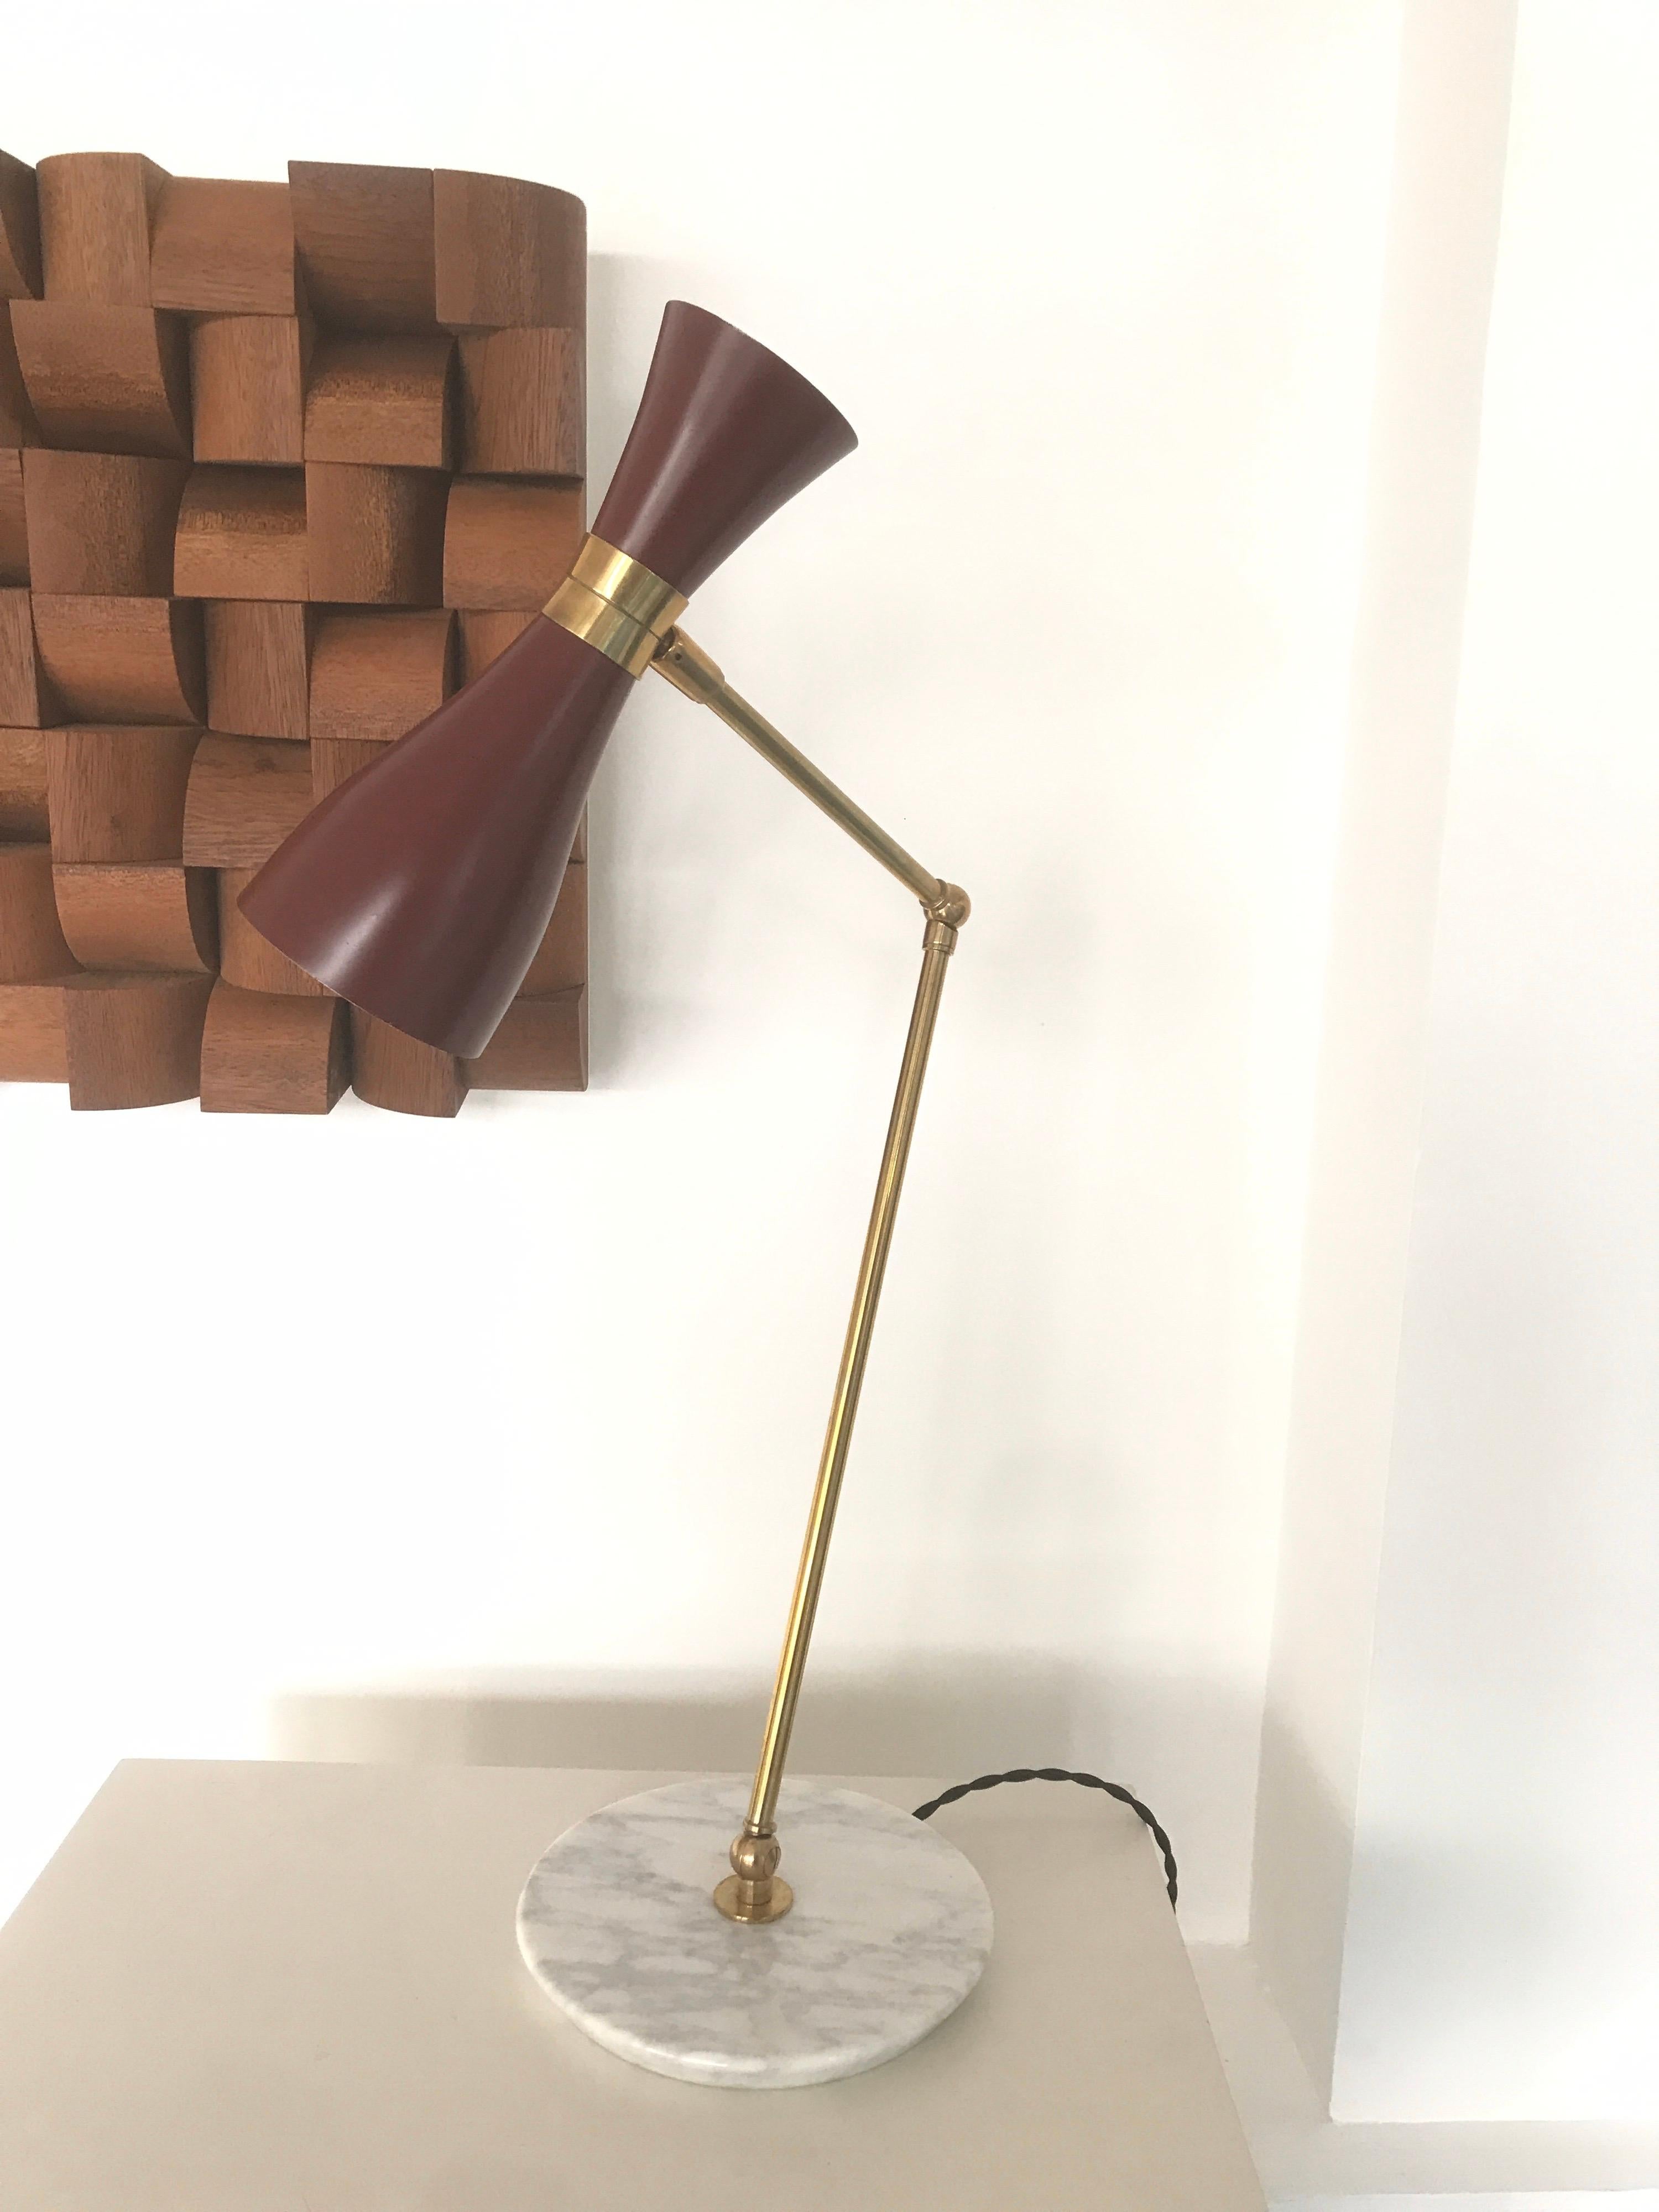 1970s Italian desk lamp.
White marble base with lacquered orientable metal shade
Rewired.